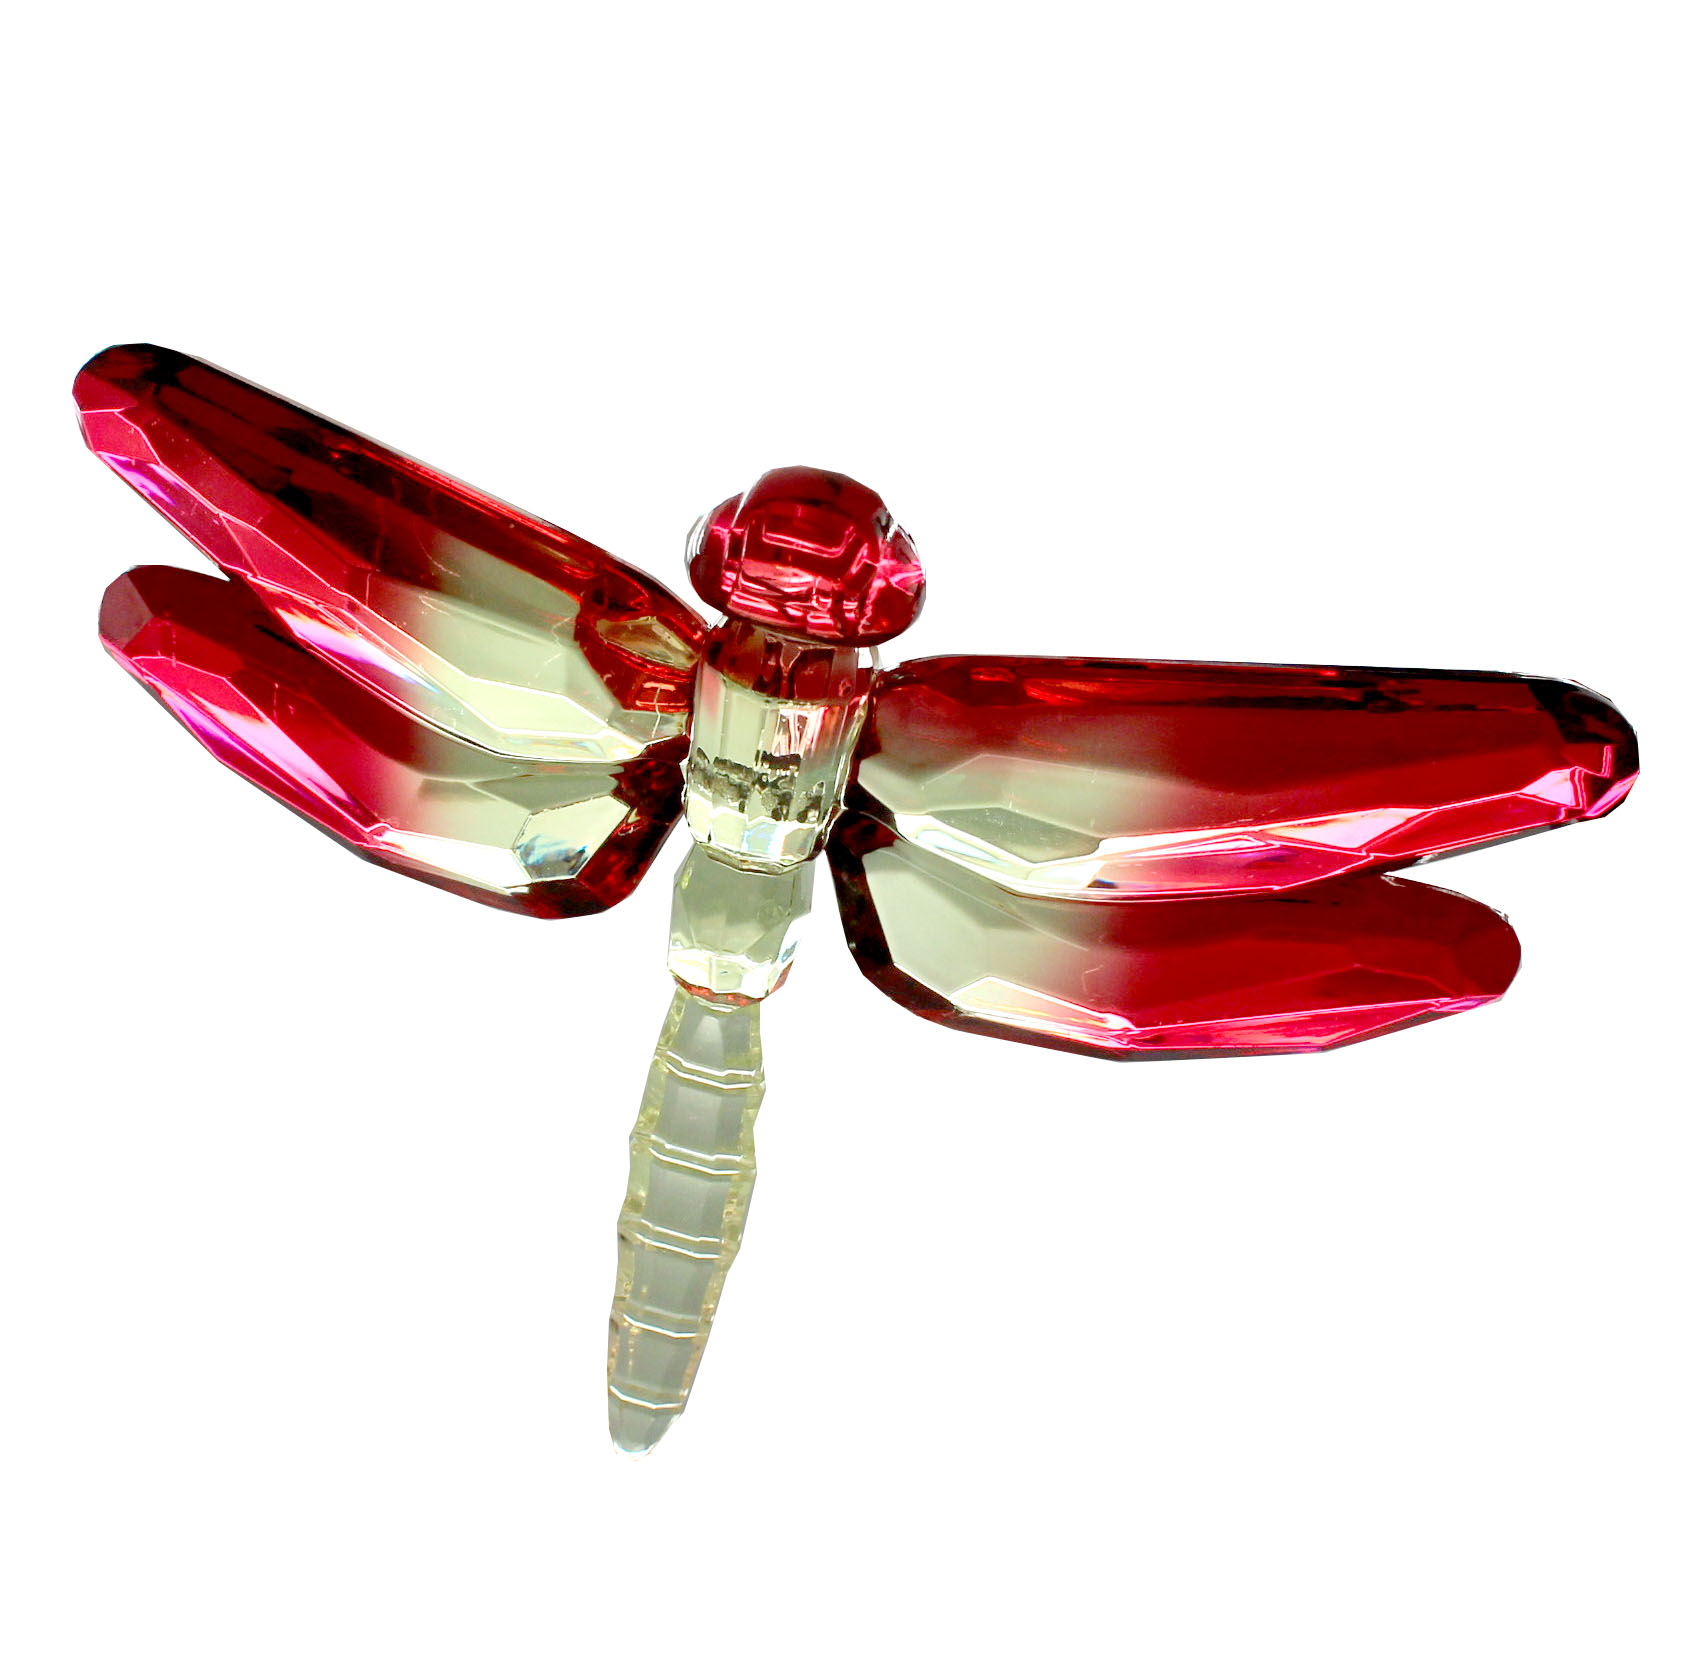 Dragonfly & Lily Pads: Red Solo Cup Ornaments